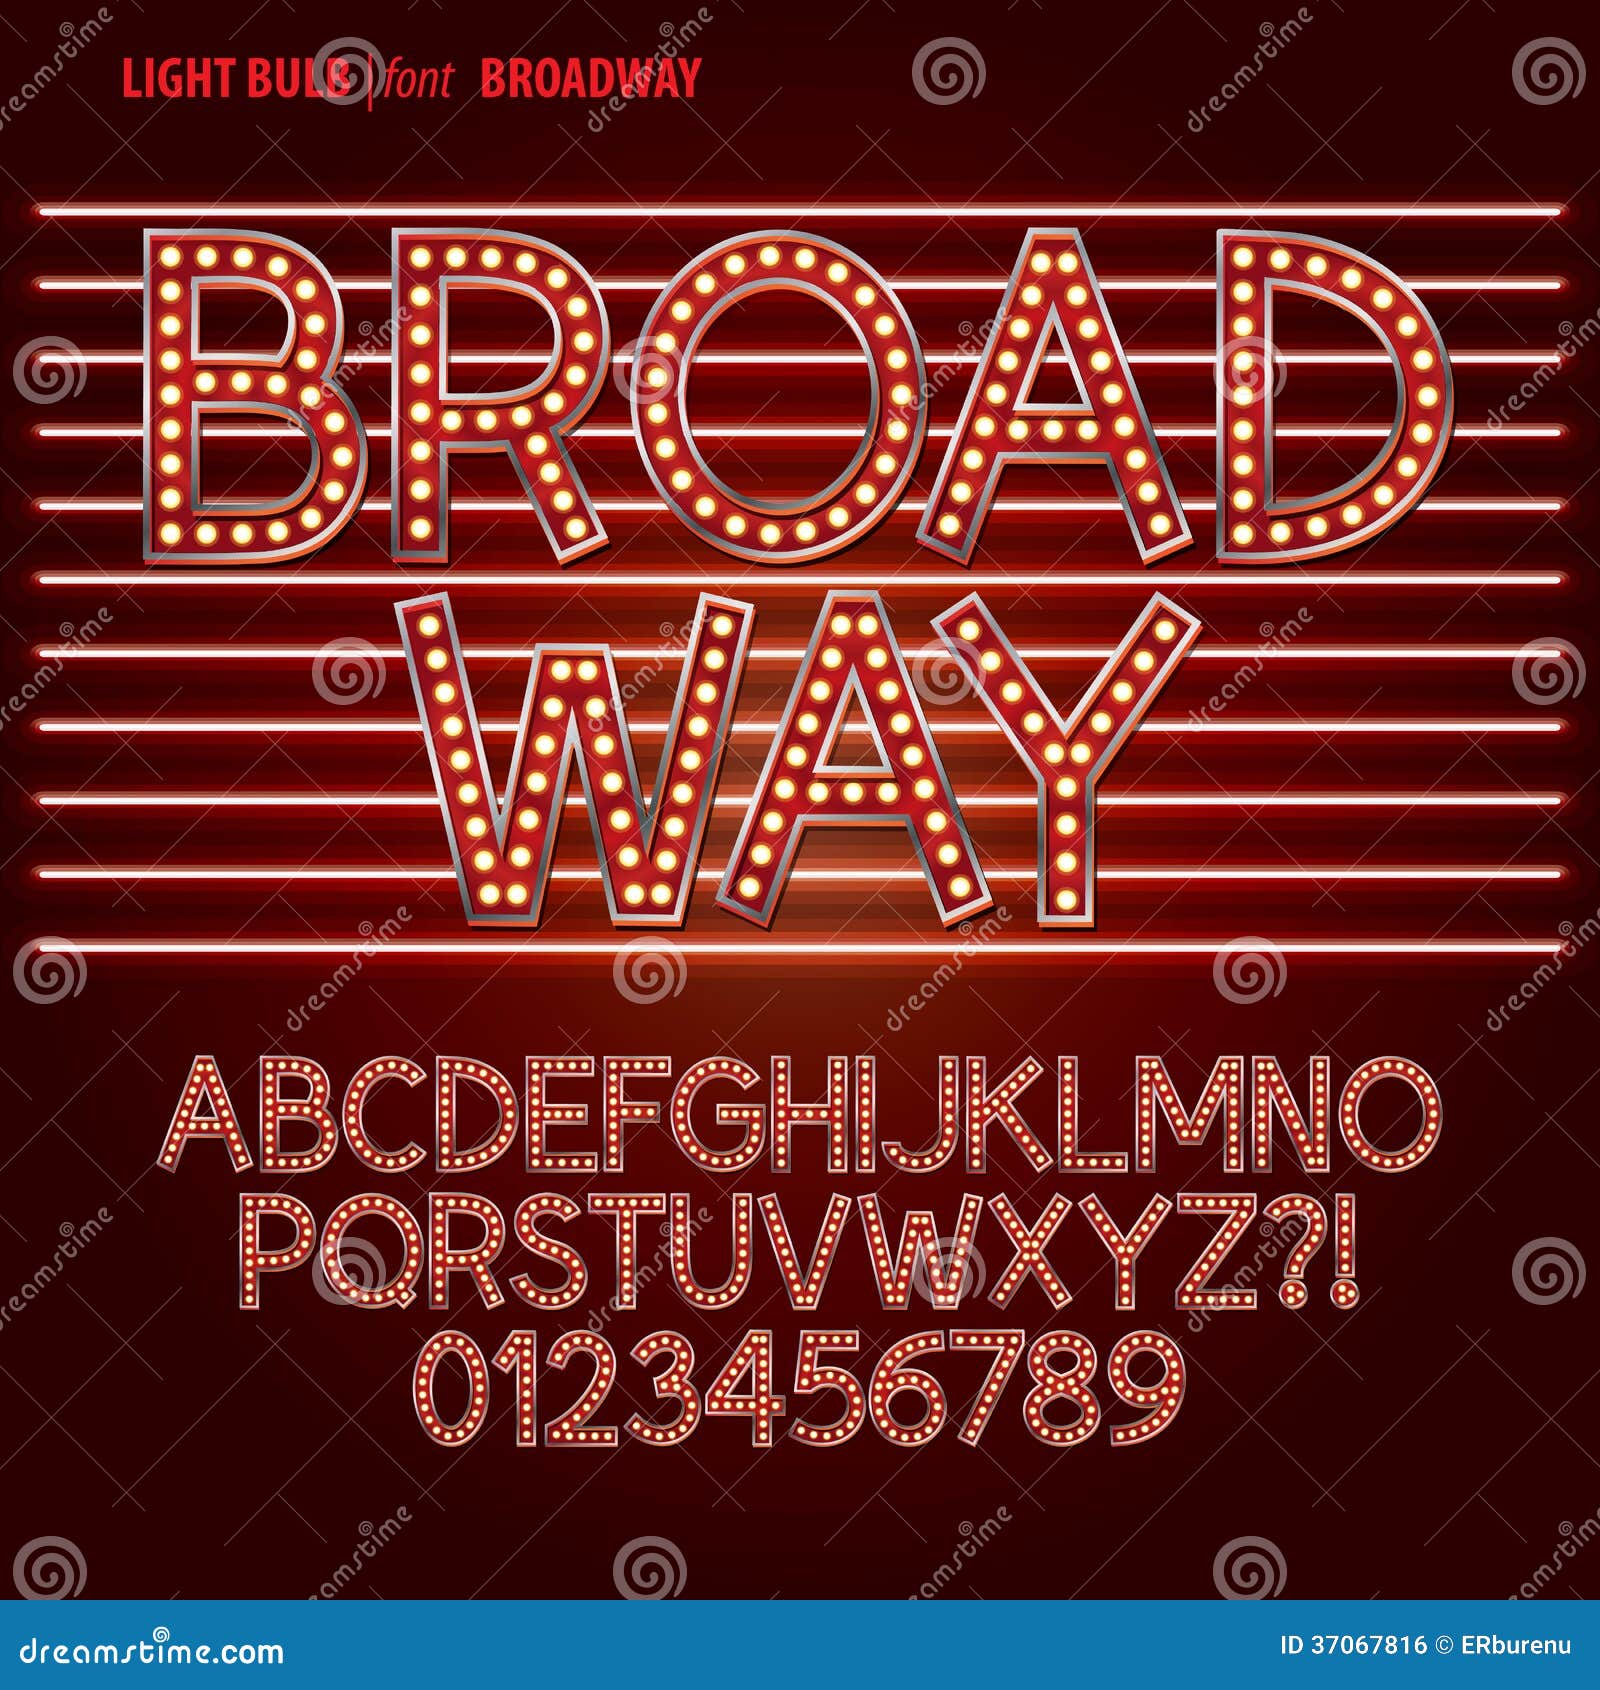 red broadway light bulb alphabet and digit 